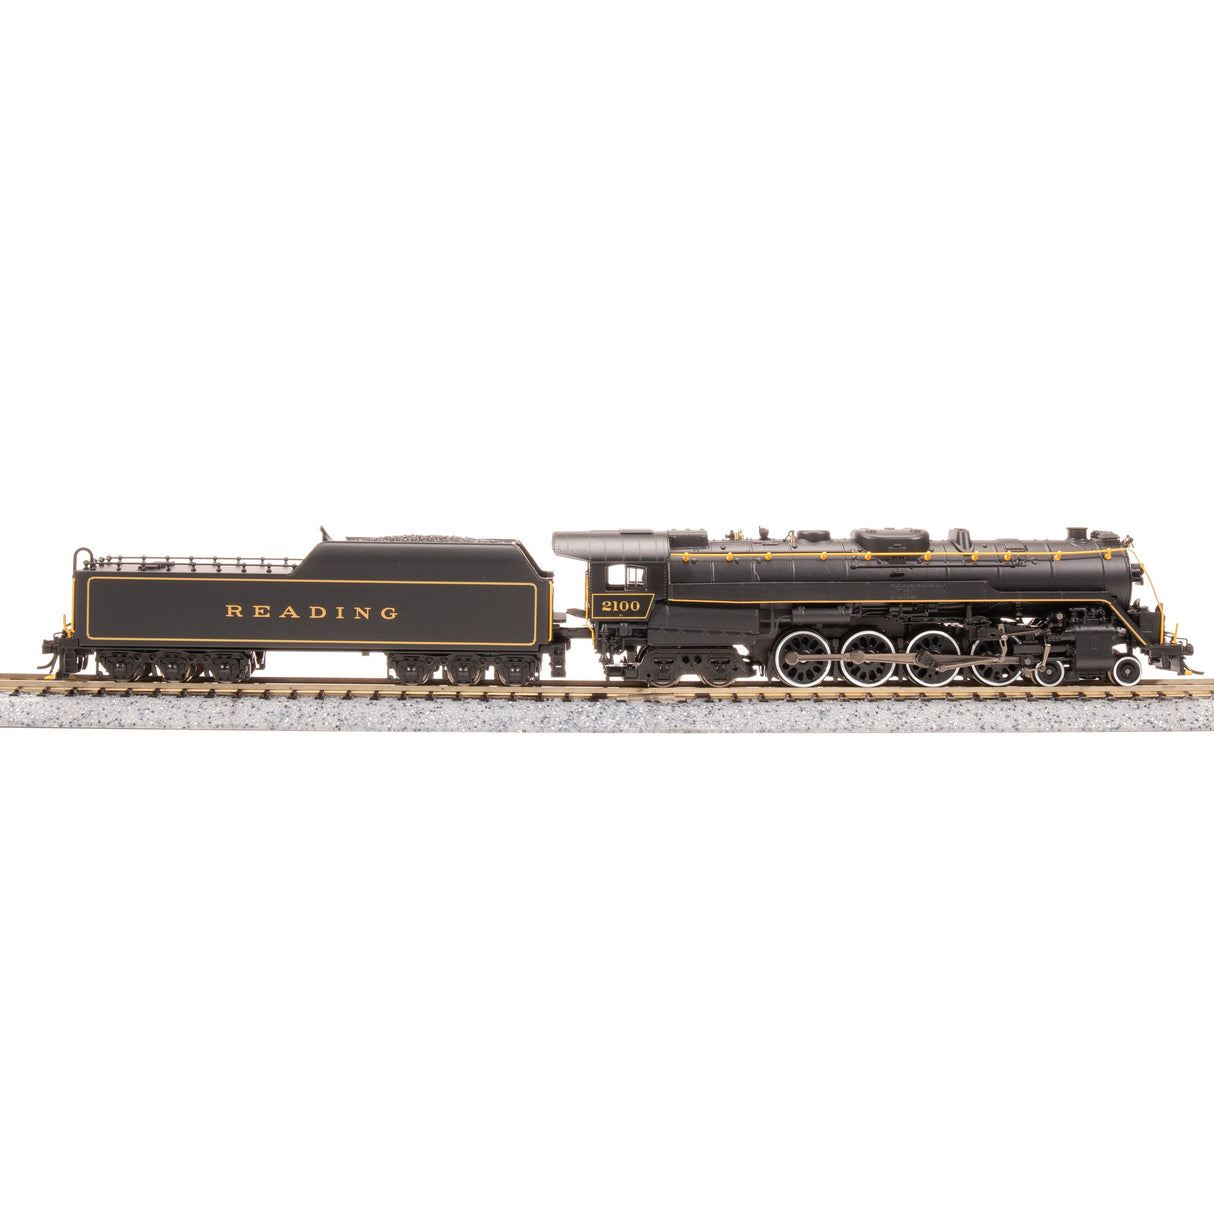 Broadway Limited N Scale Reading T-1 4-8-4 Steam Locomotive #2124/Excursion DC/DCC Sound